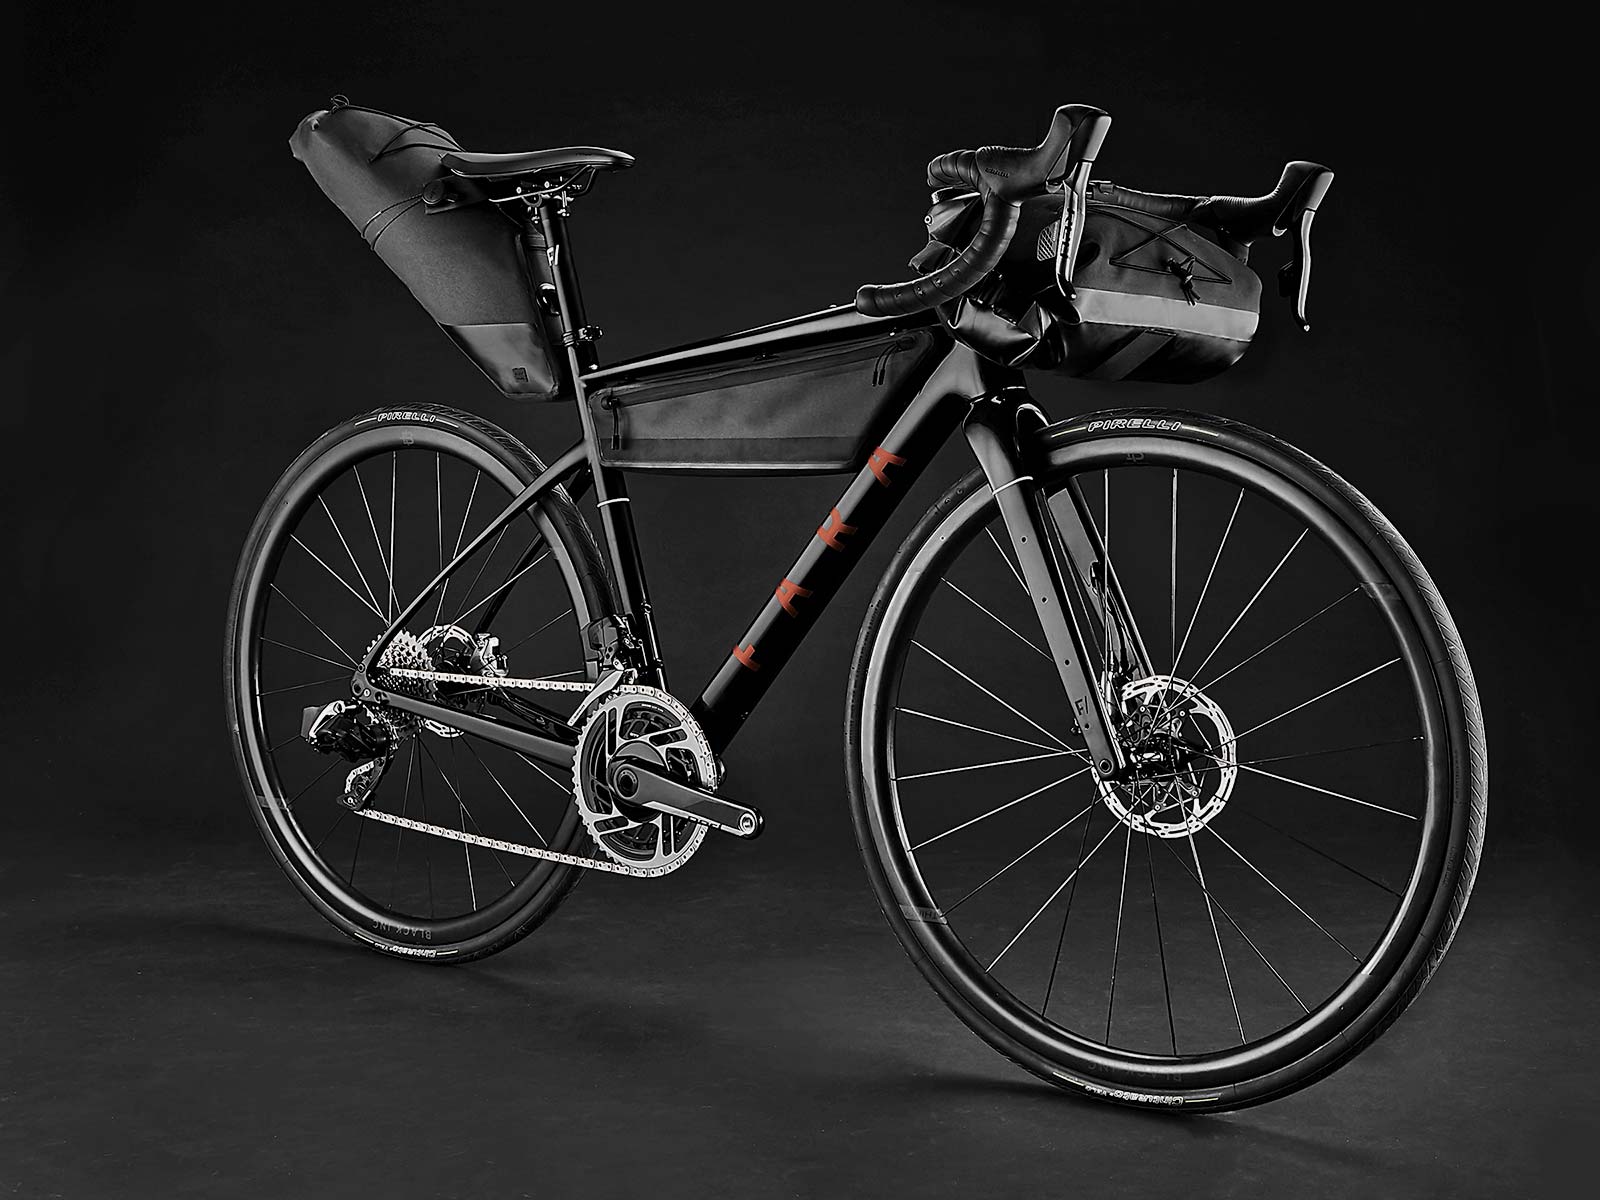 2021 Fara F-AR all-road bike ltd Signature Edition, carbon endurance gravel road bike with integrated bikepacking bags, complete angled